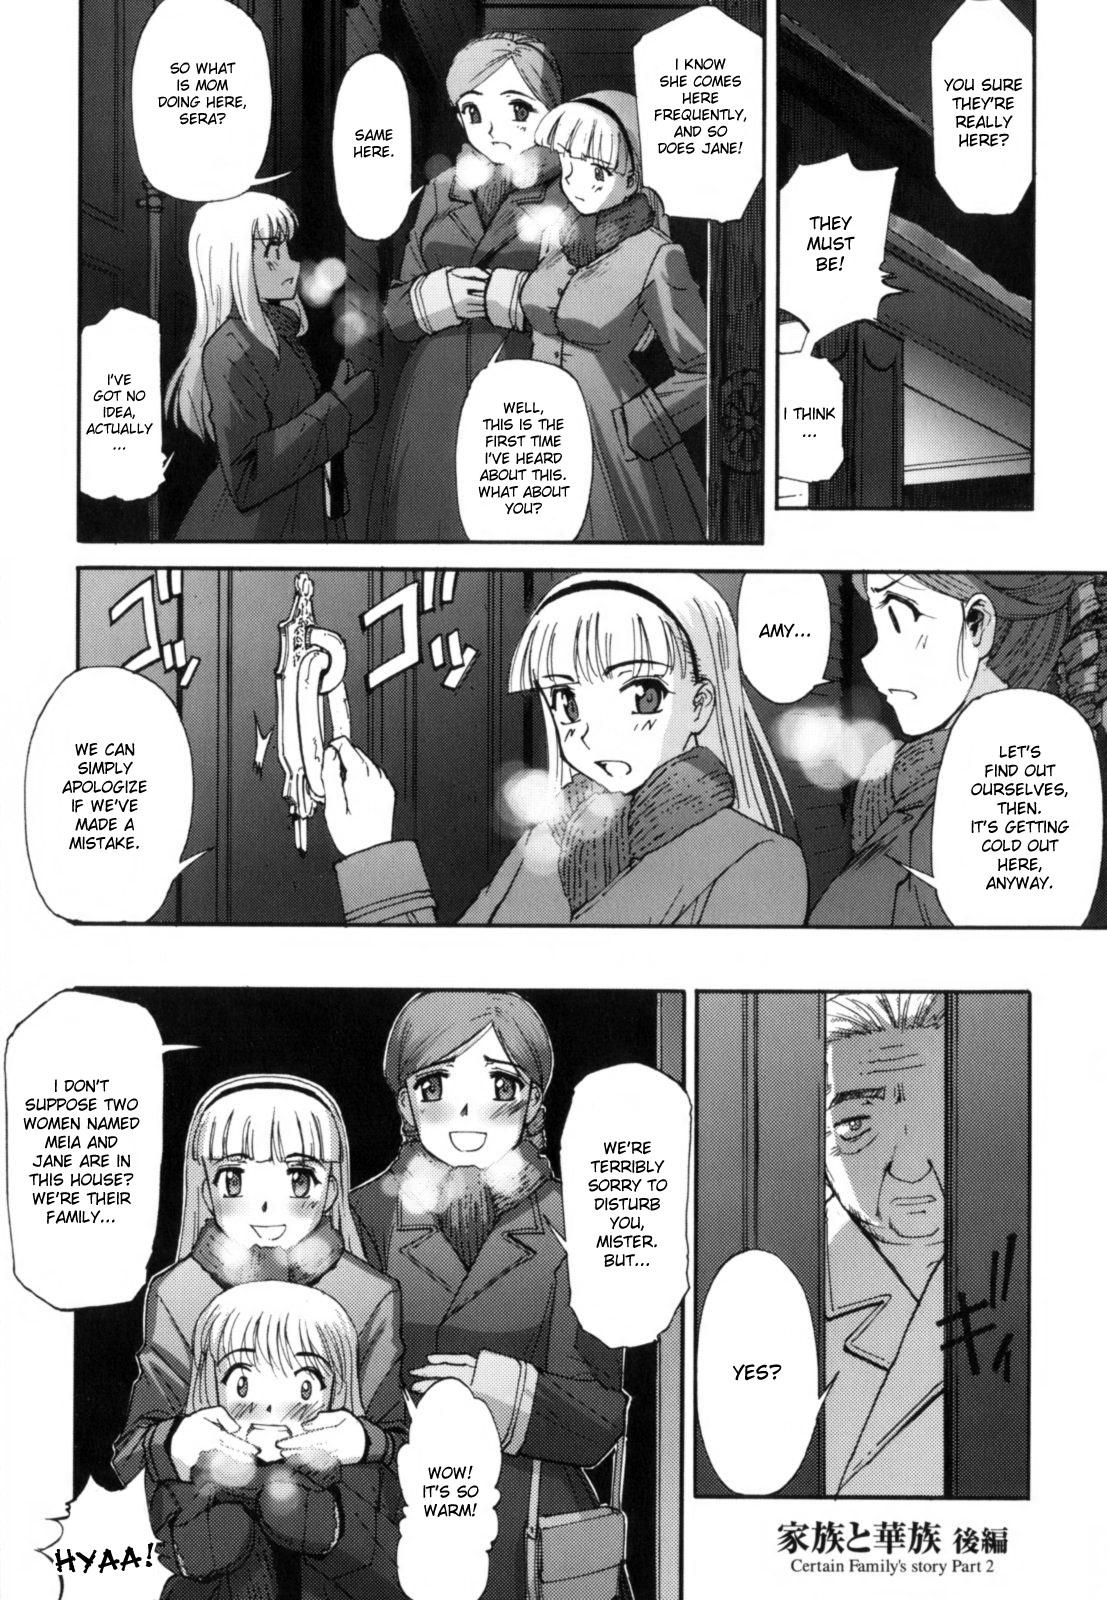 A Certain Family's Story Part 1-2 20